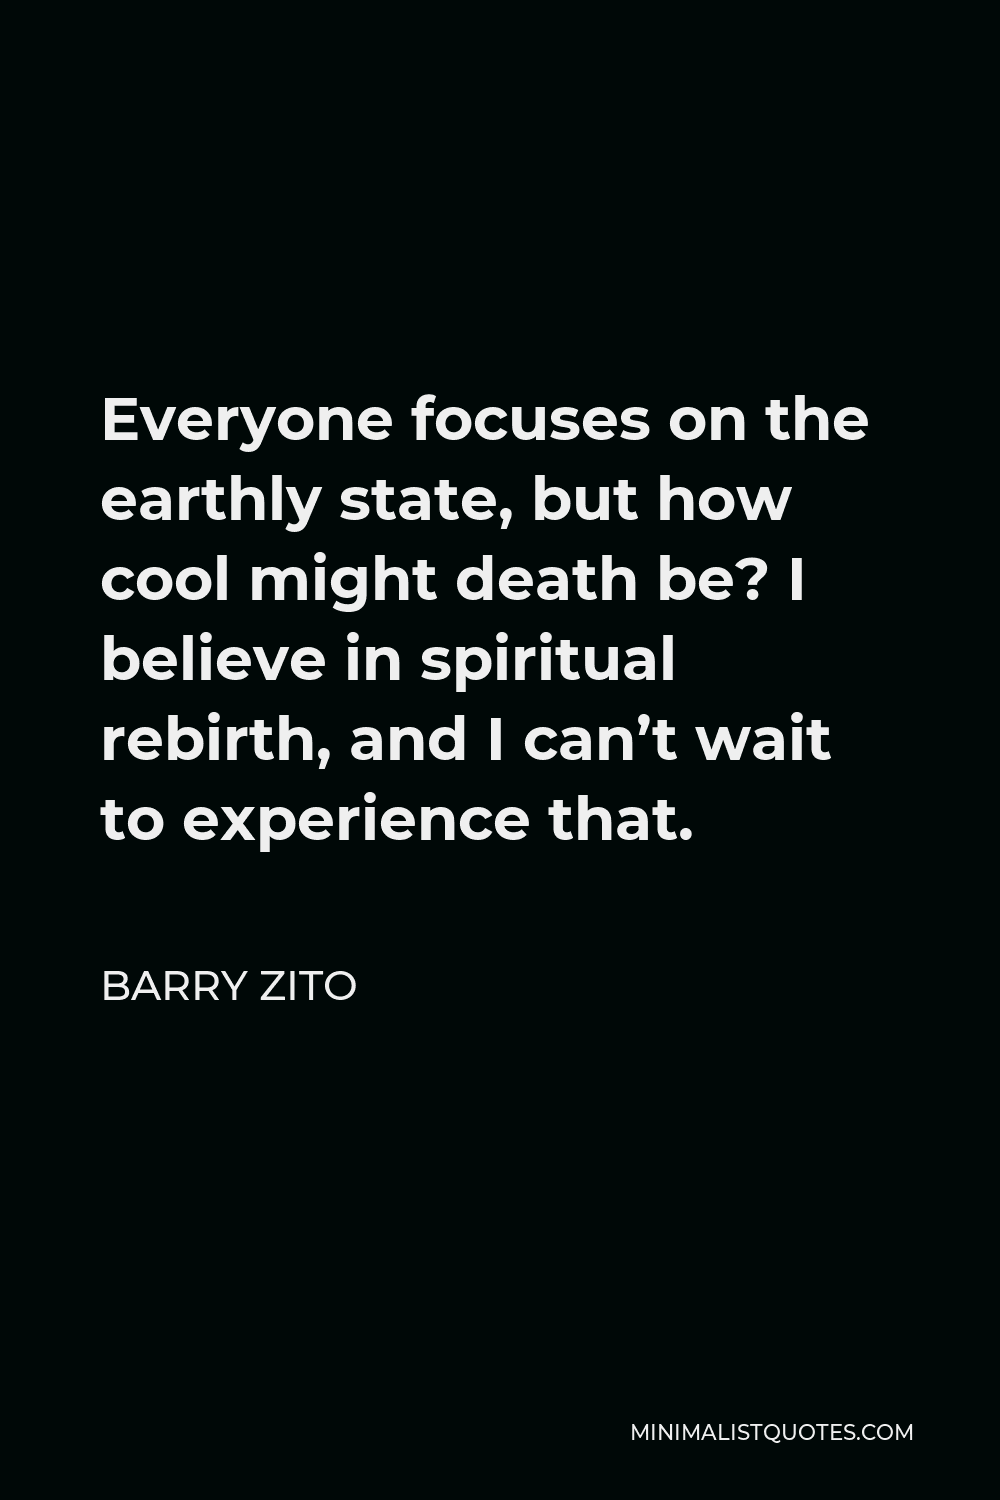 Barry Zito Quote - Everyone focuses on the earthly state, but how cool might death be? I believe in spiritual rebirth, and I can’t wait to experience that.